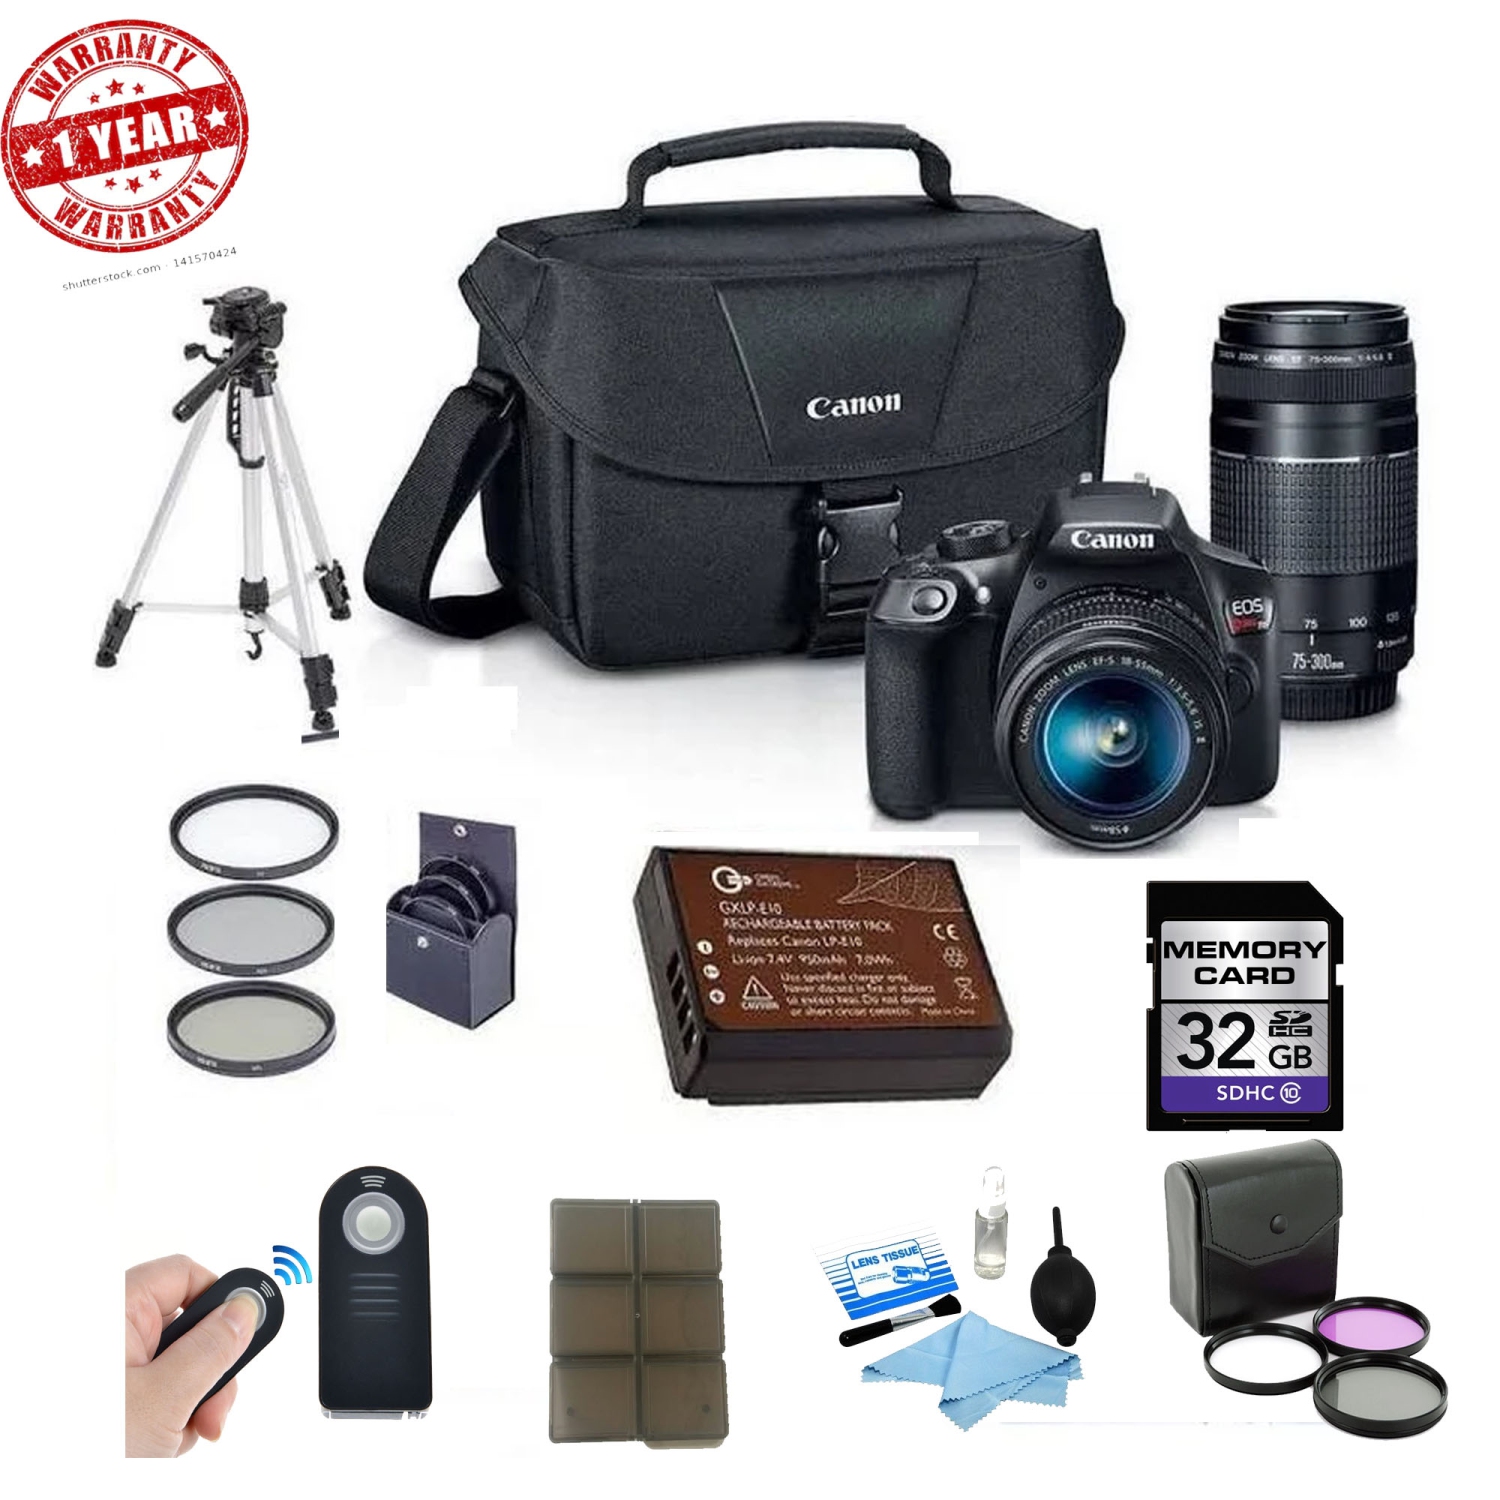 Canon EOS 1300D / Rebel T6 DSLR with 18-55mm Is and 75-300mm III Lenses and Premium Kit - US Version w/ Seller Warranty